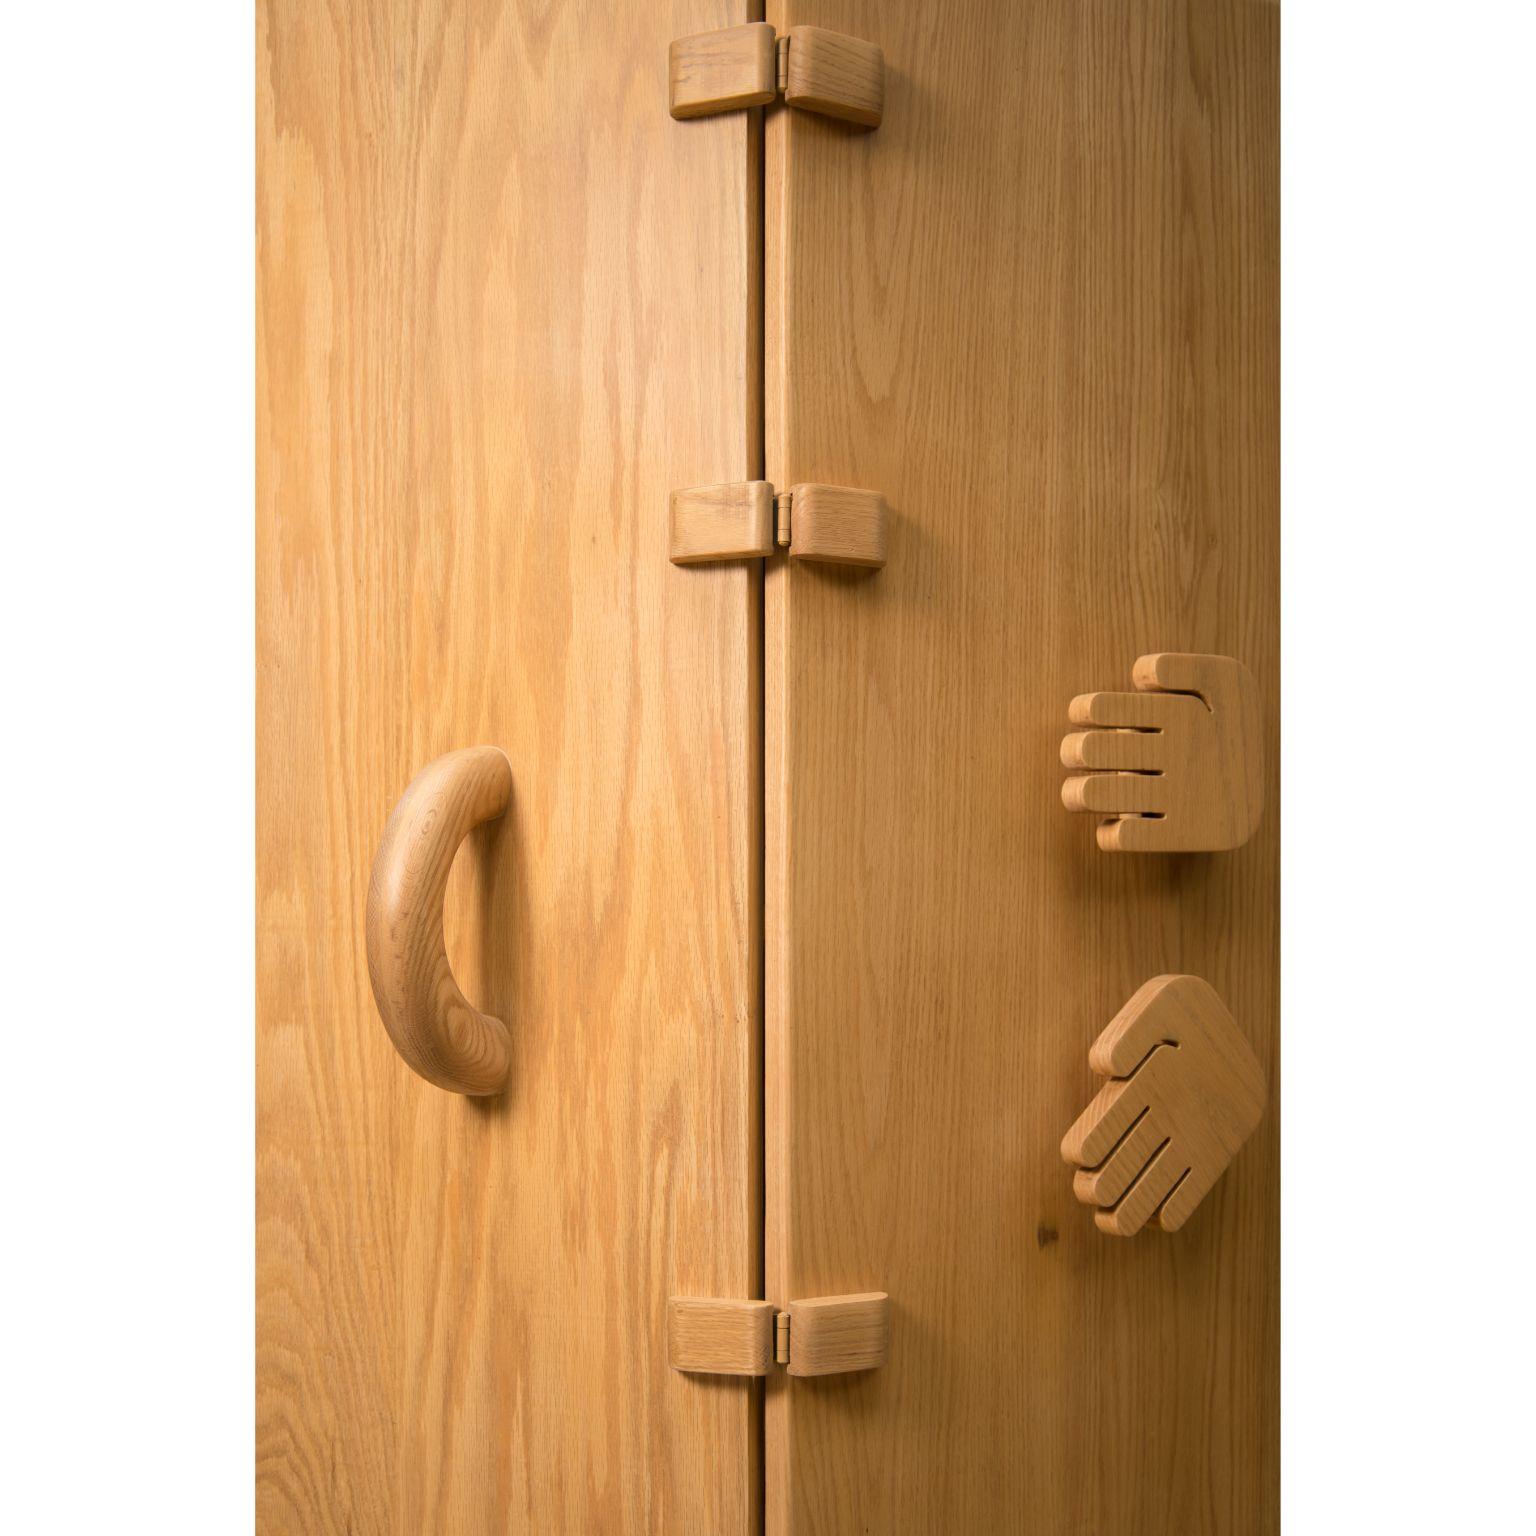 Hand-Crafted Coatlicue Cabinet by Andres Gutierrez For Sale